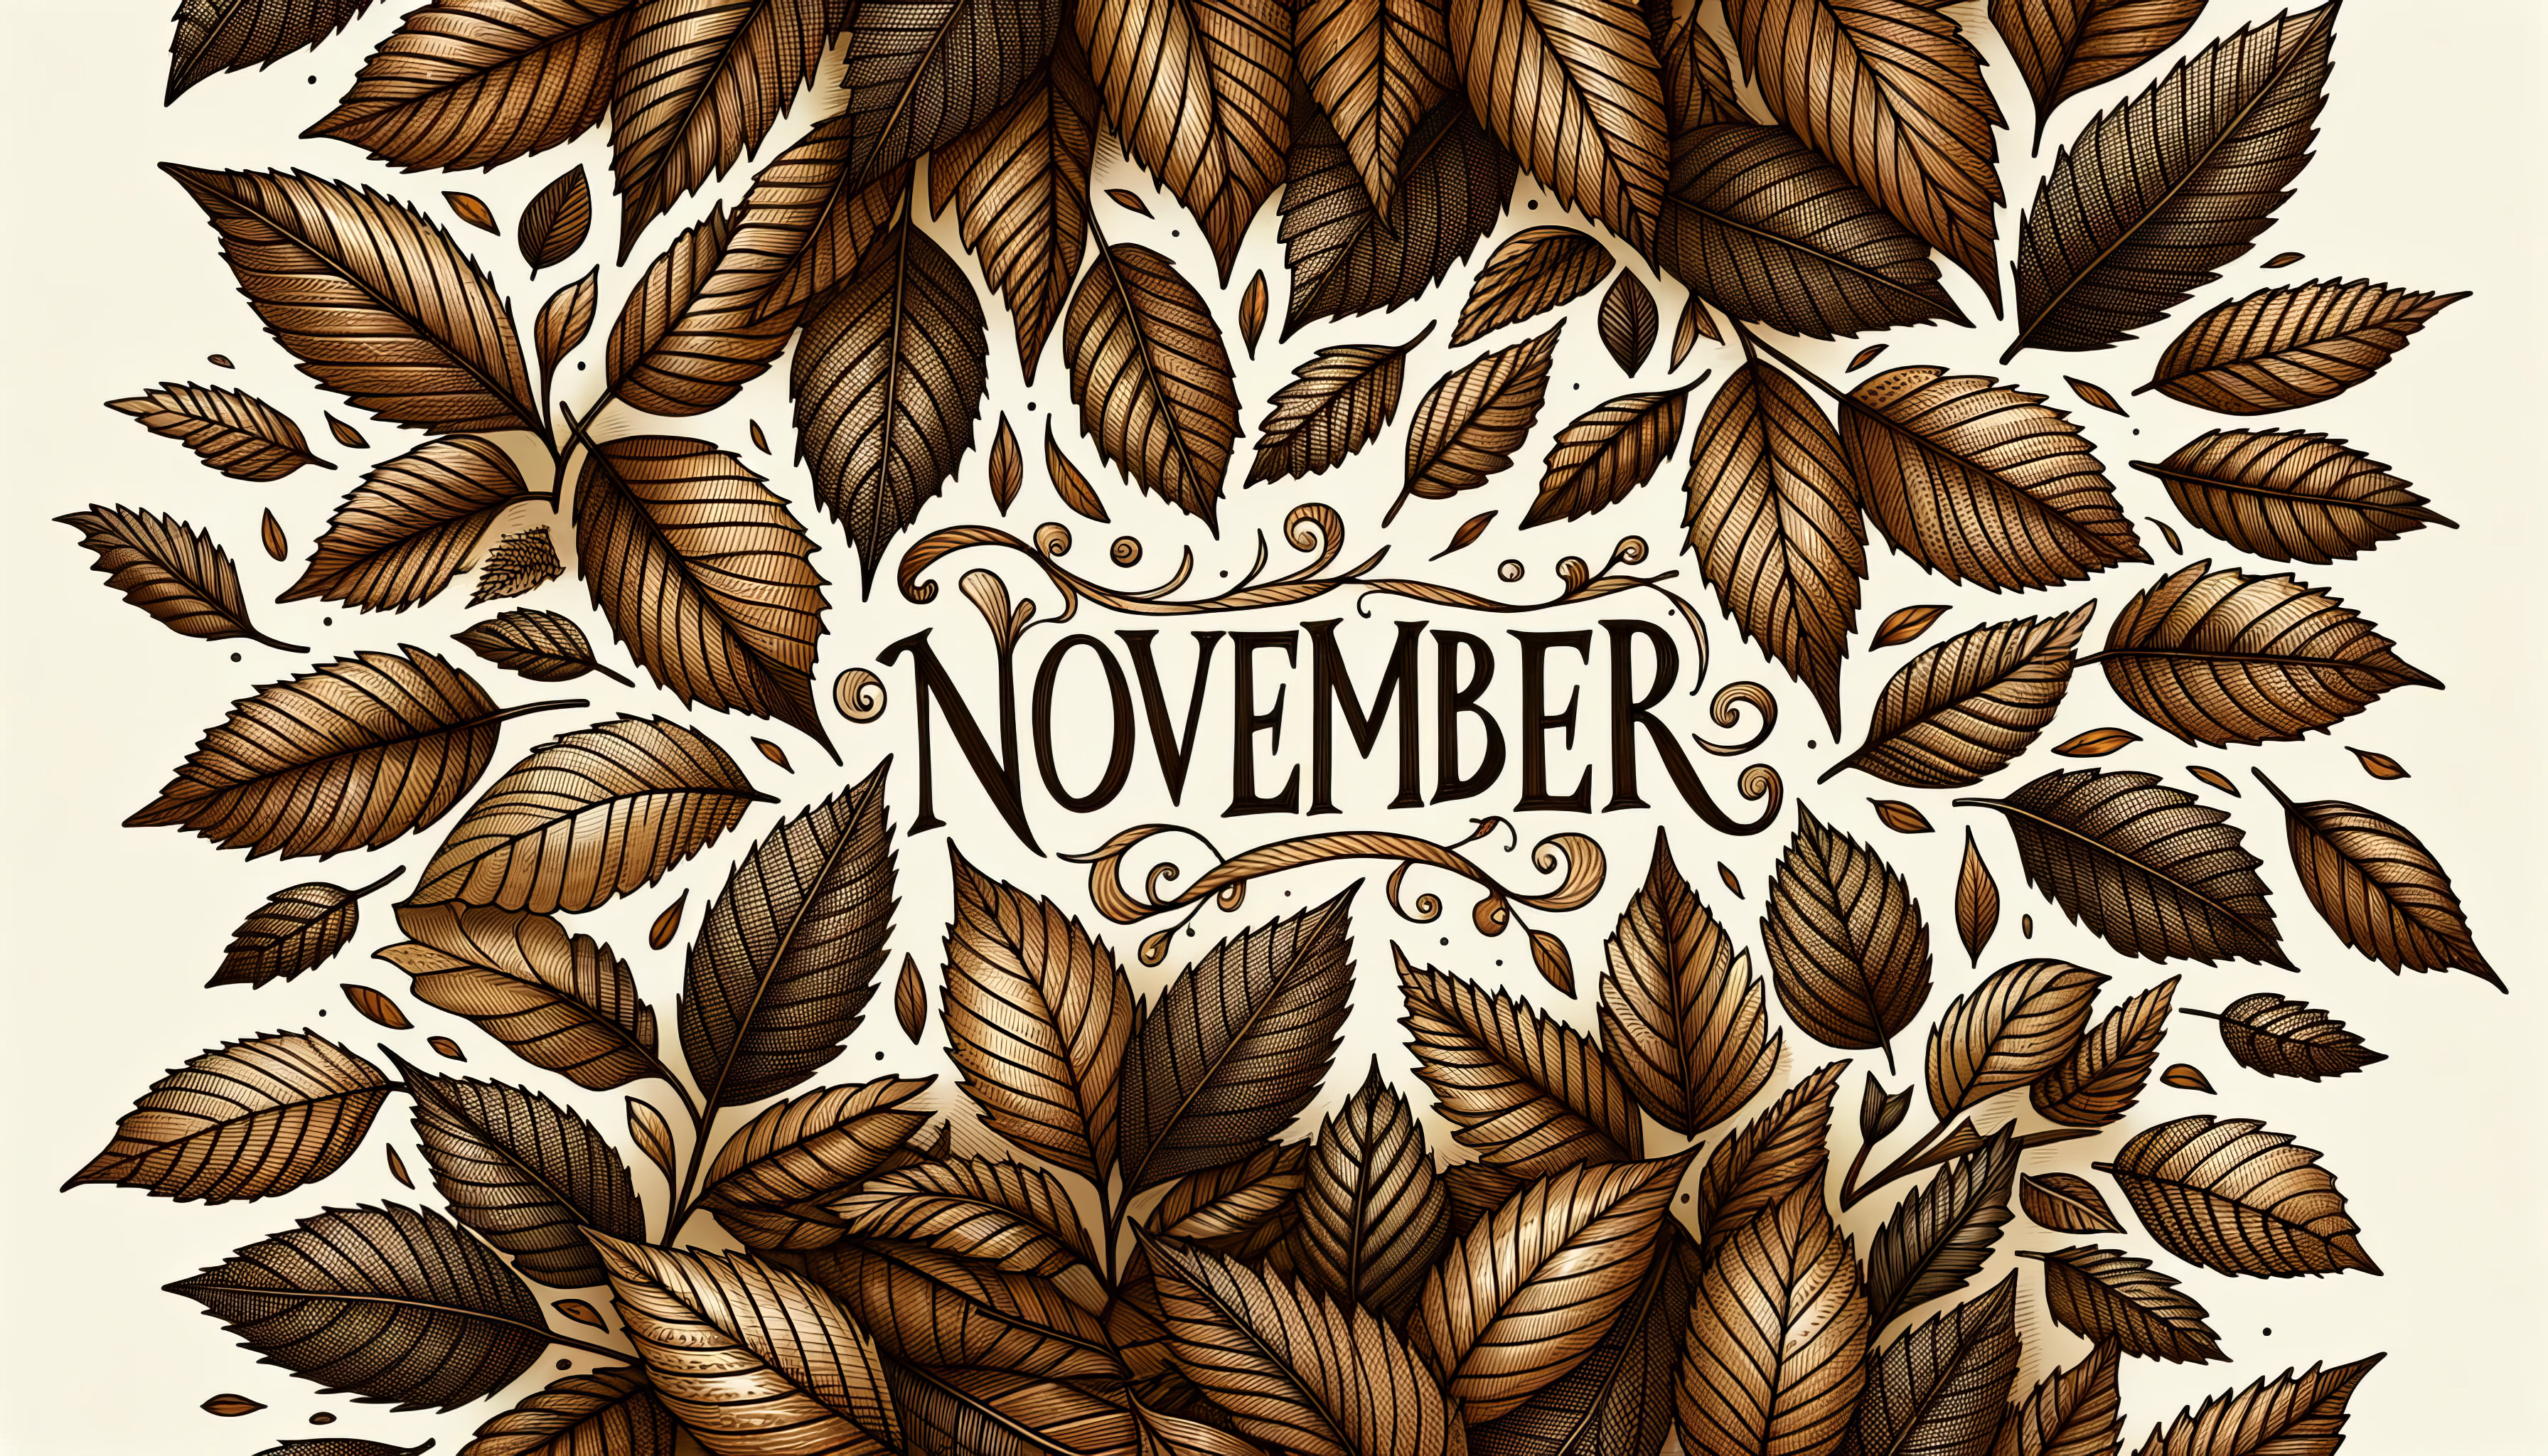 November-themed HD desktop wallpaper with elegant leaf pattern and stylish typography.